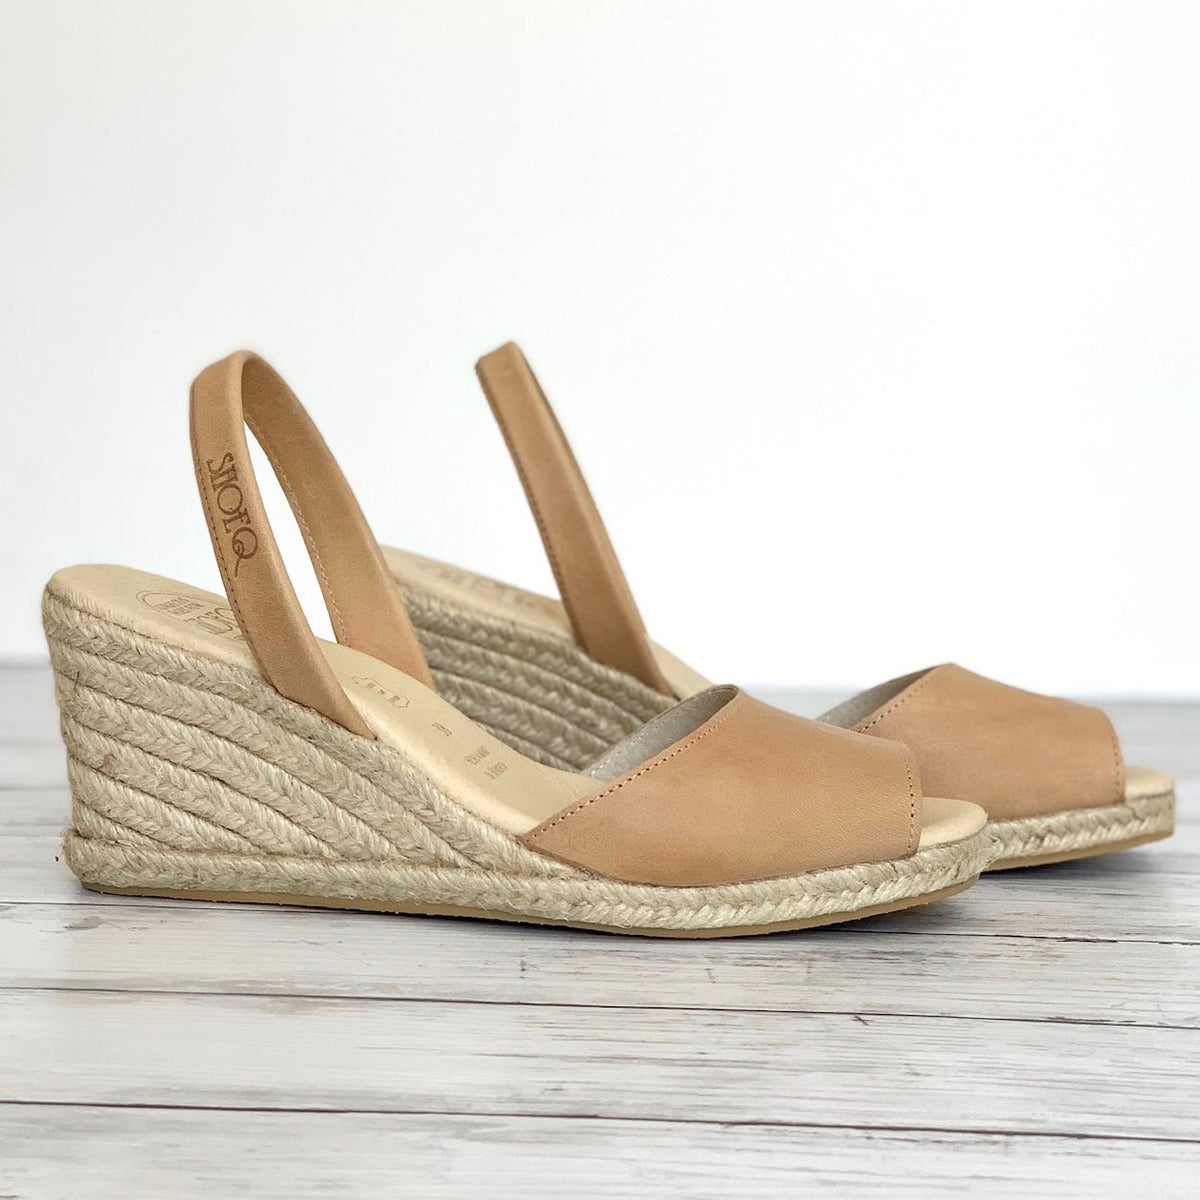 Classic Espadrille Wedge in Caramel Leather - Shoeq